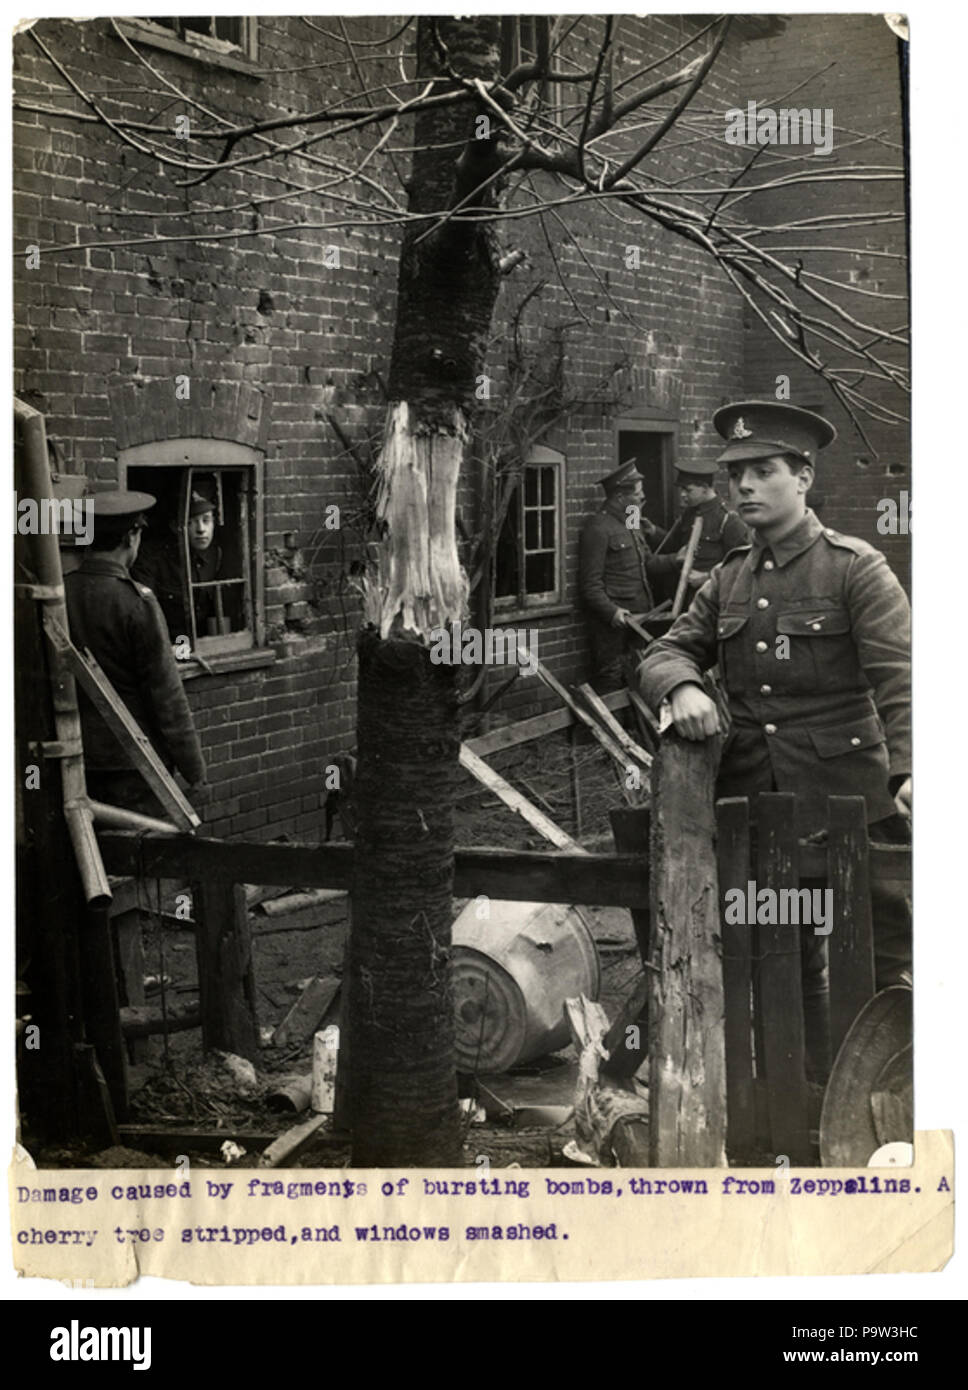 369 Damage caused by fragments of bursting bombs, thrown from zeppelins (Photo 24-28) Stock Photo